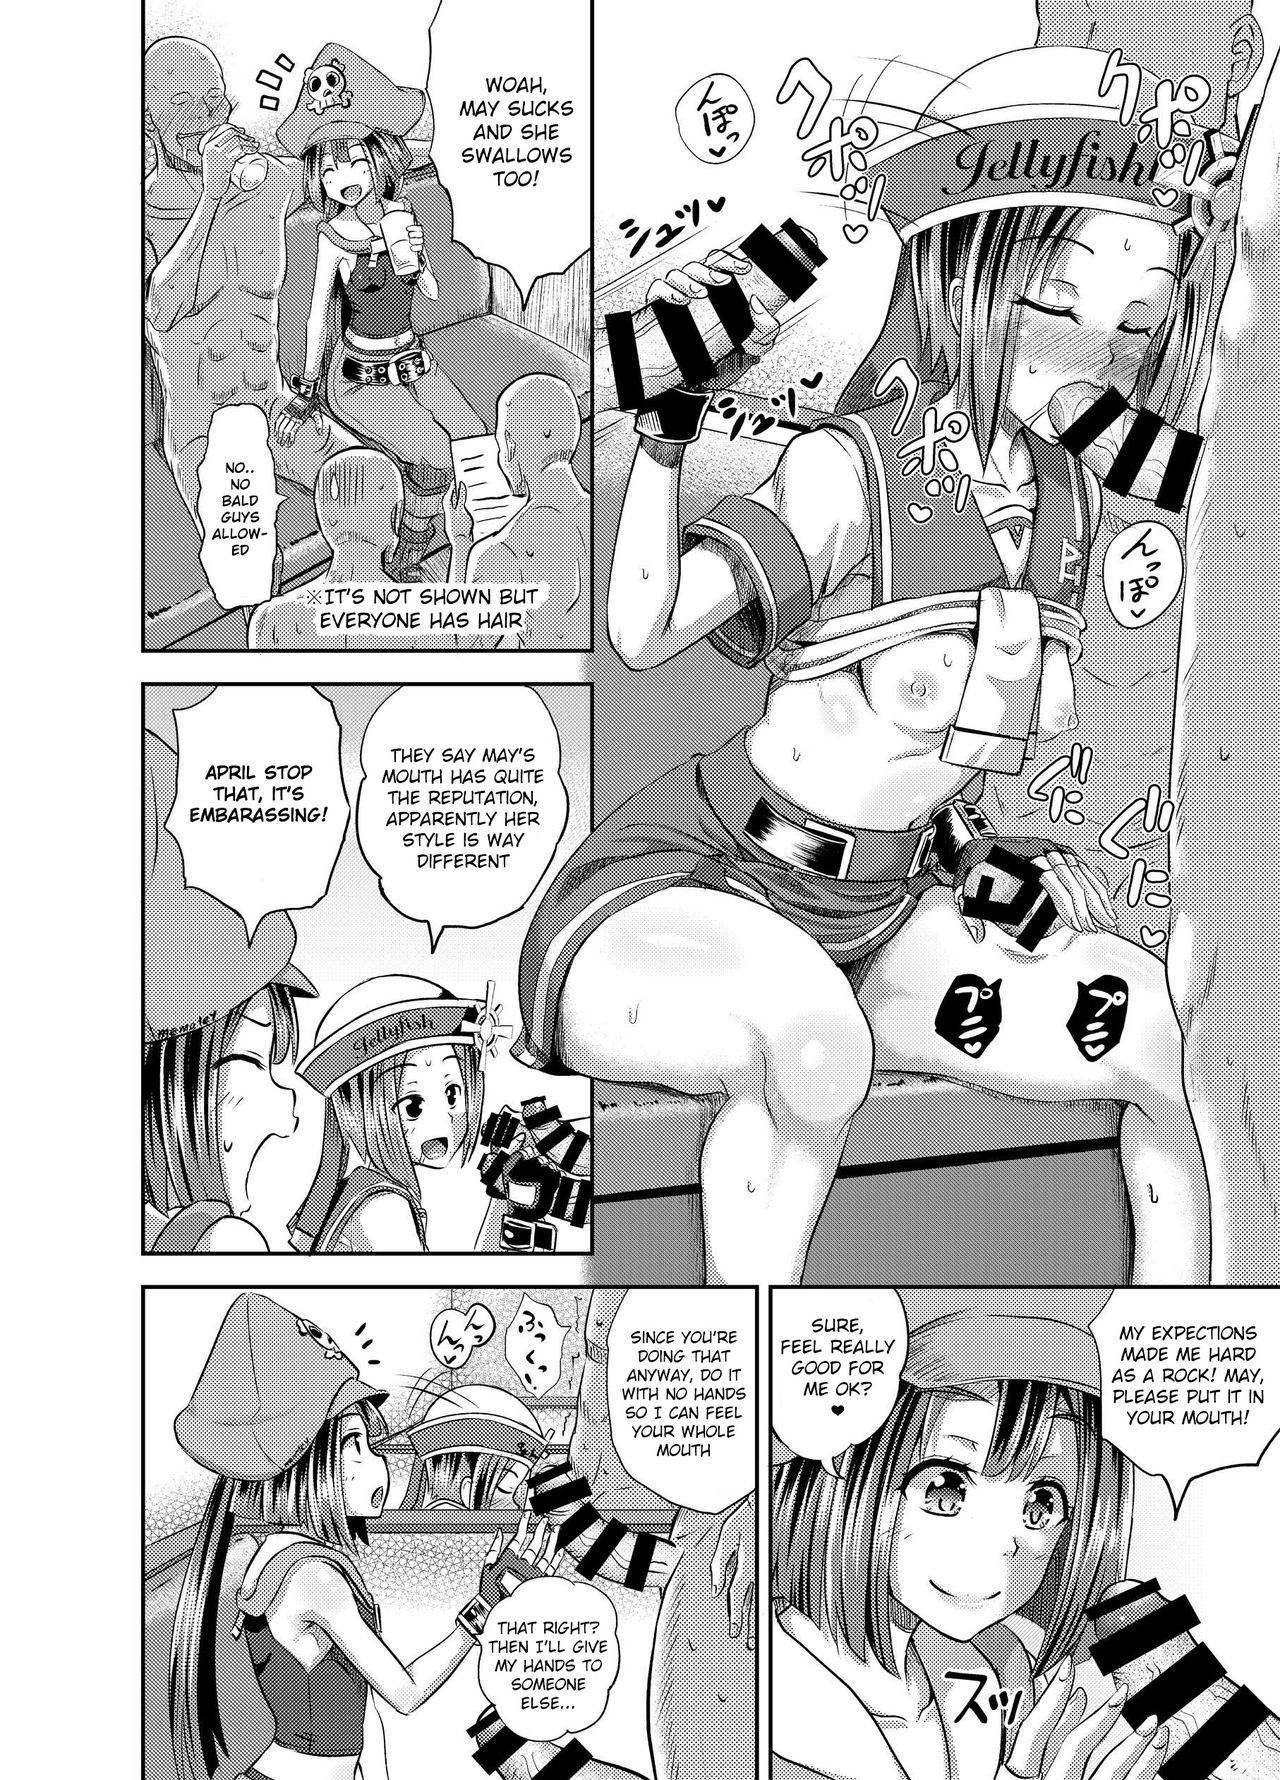 Esposa Jellyfish Kaizokudan e Youkoso! | Welcome to The Jellyfish Pleasure Club! - Guilty gear Red - Page 5